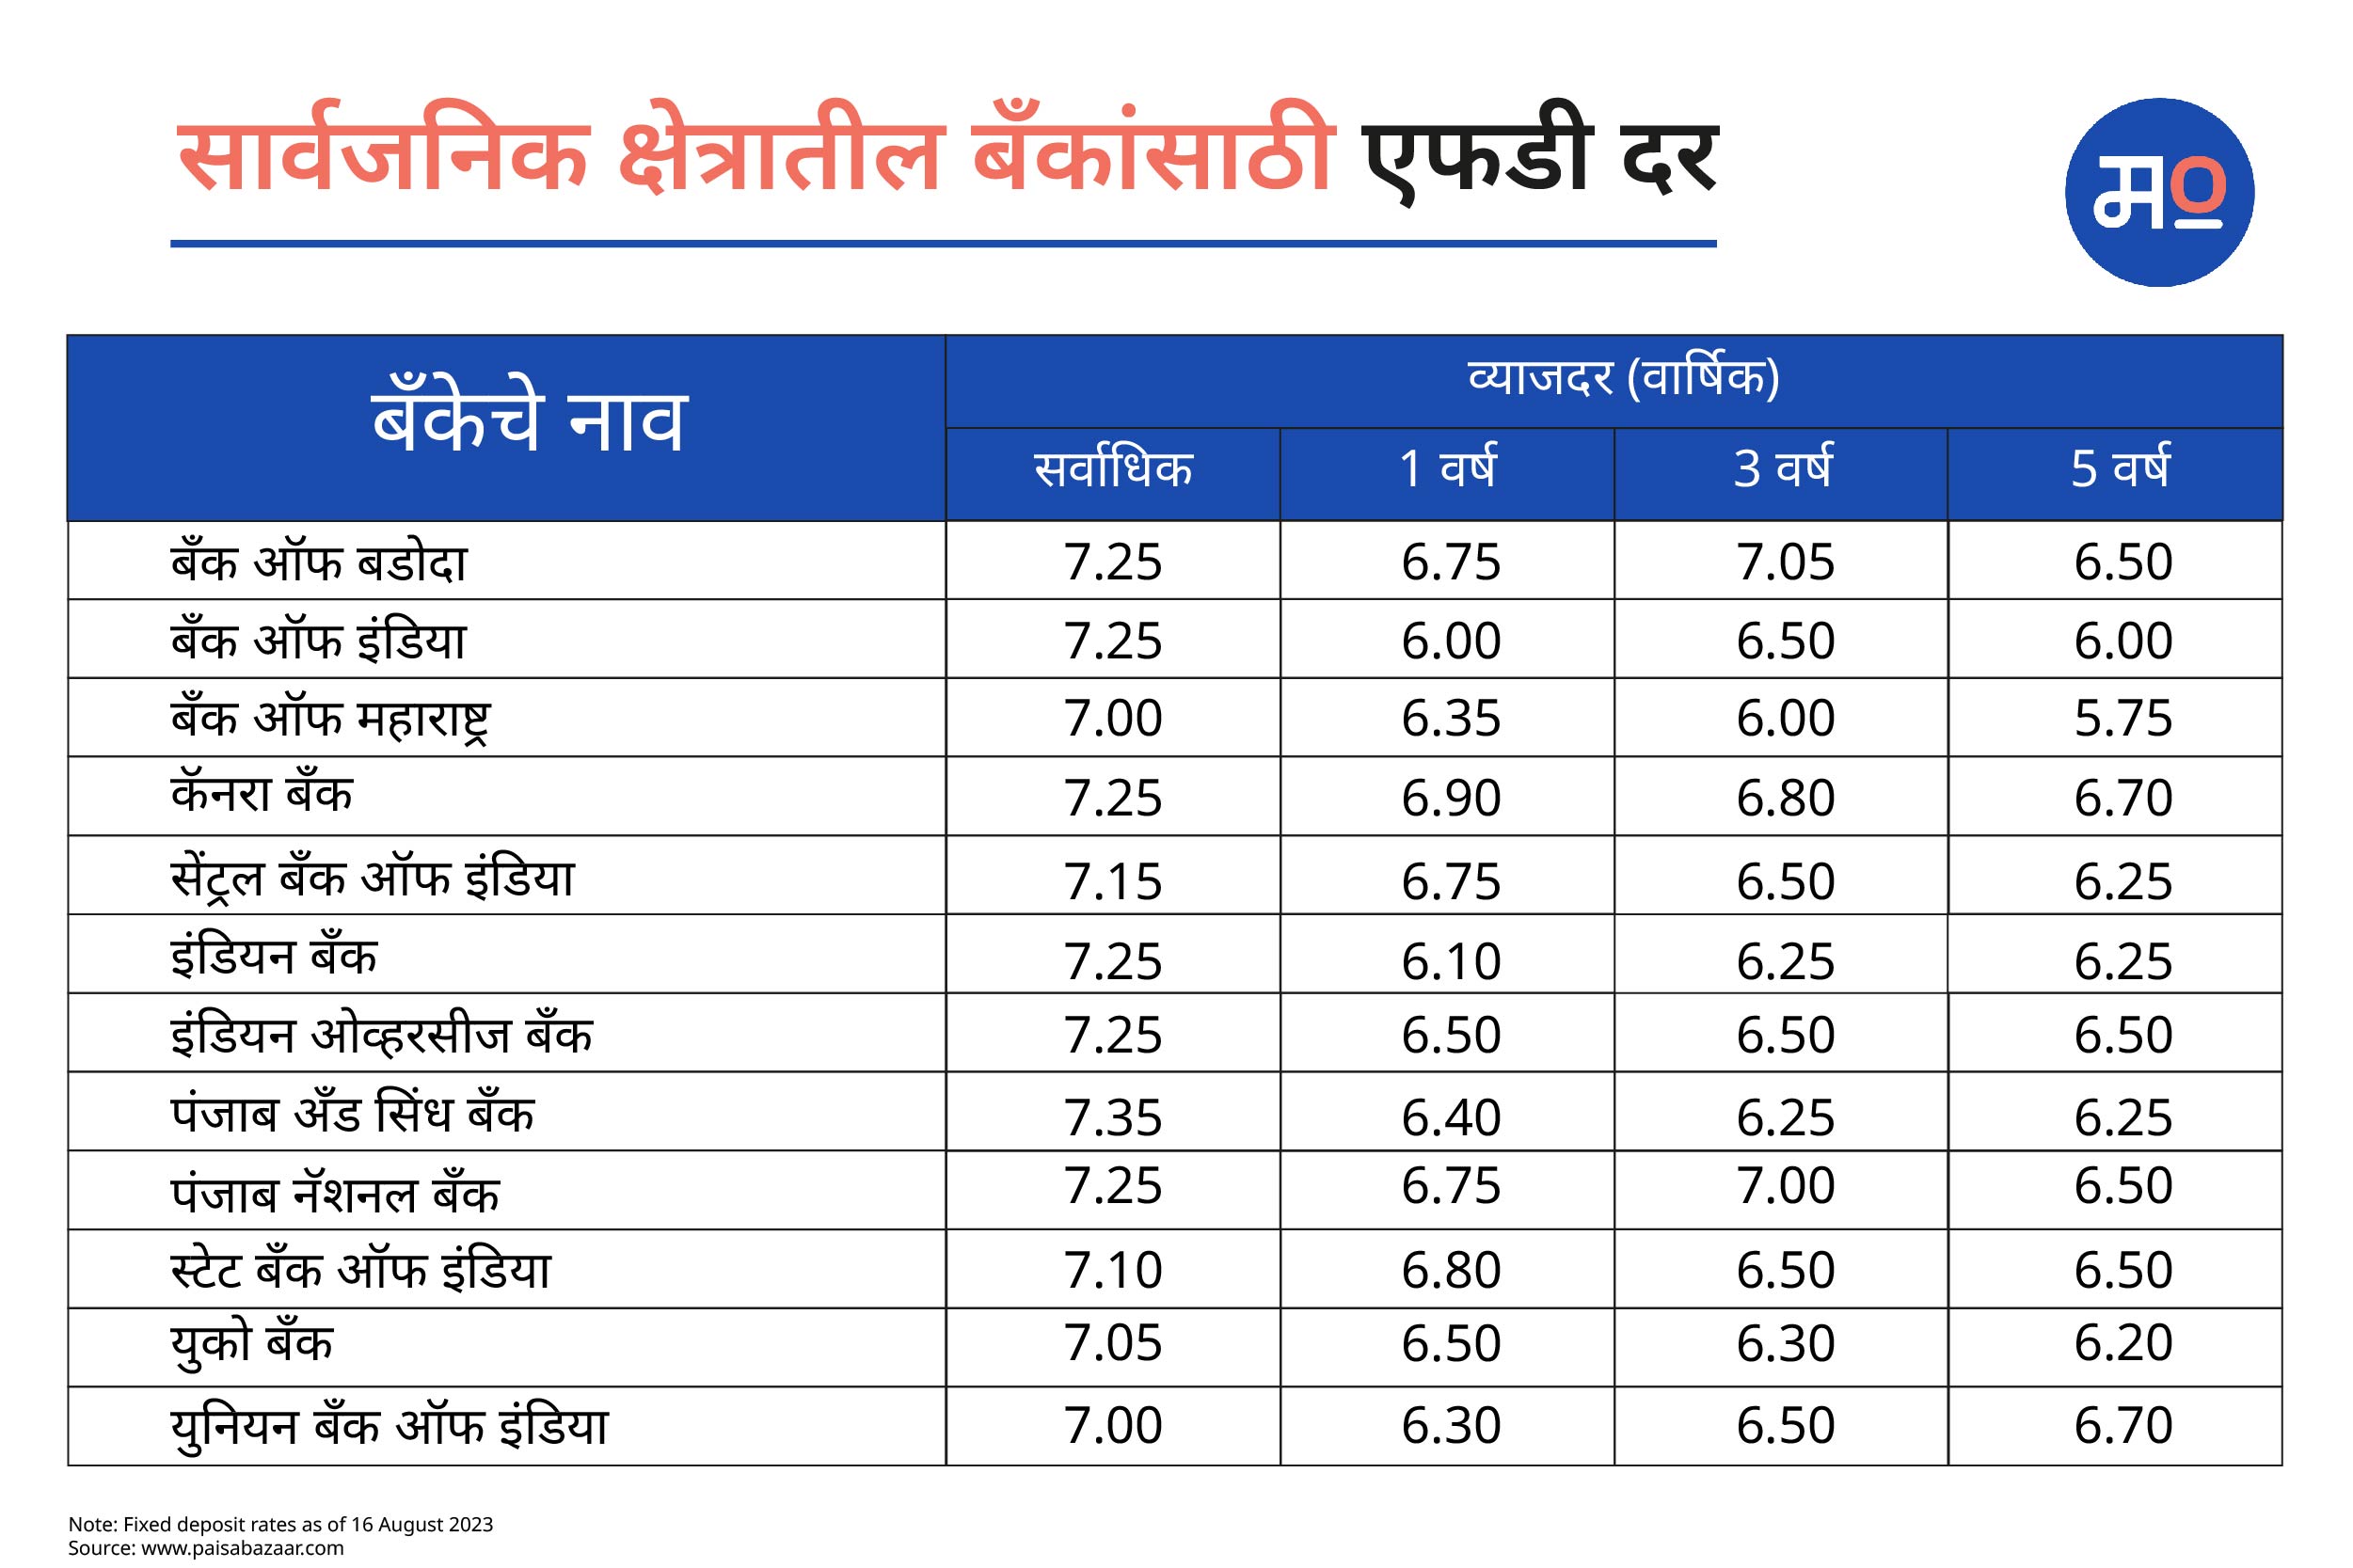 FD Rates for Public Sector Banks